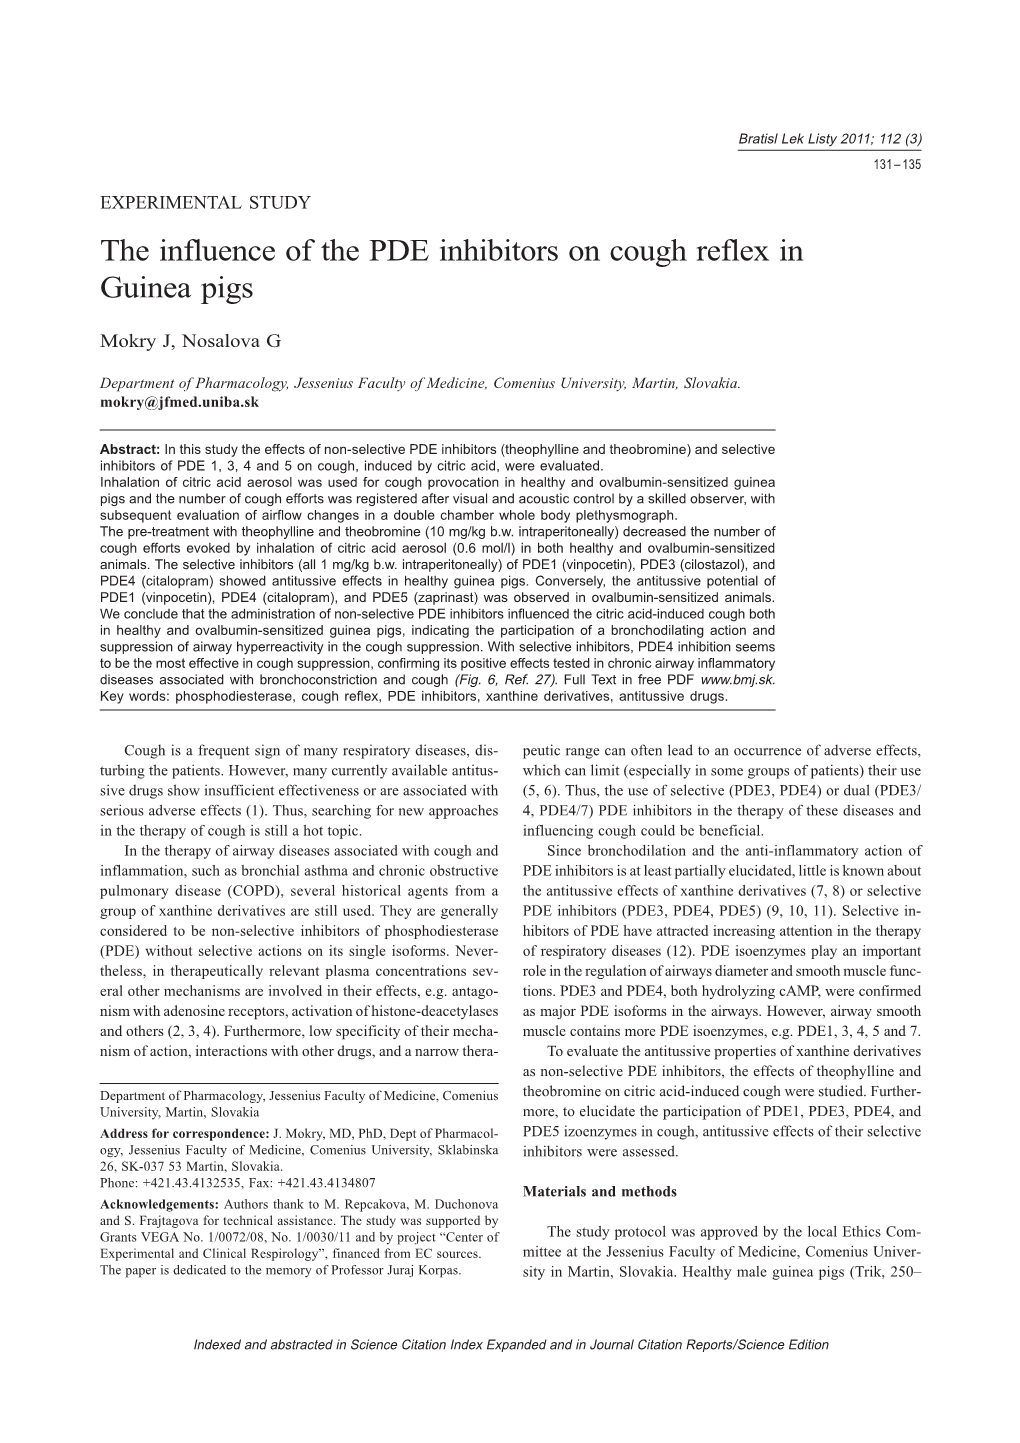 The Influence of the PDE Inhibitors on Cough Reflex in Guinea Pigs